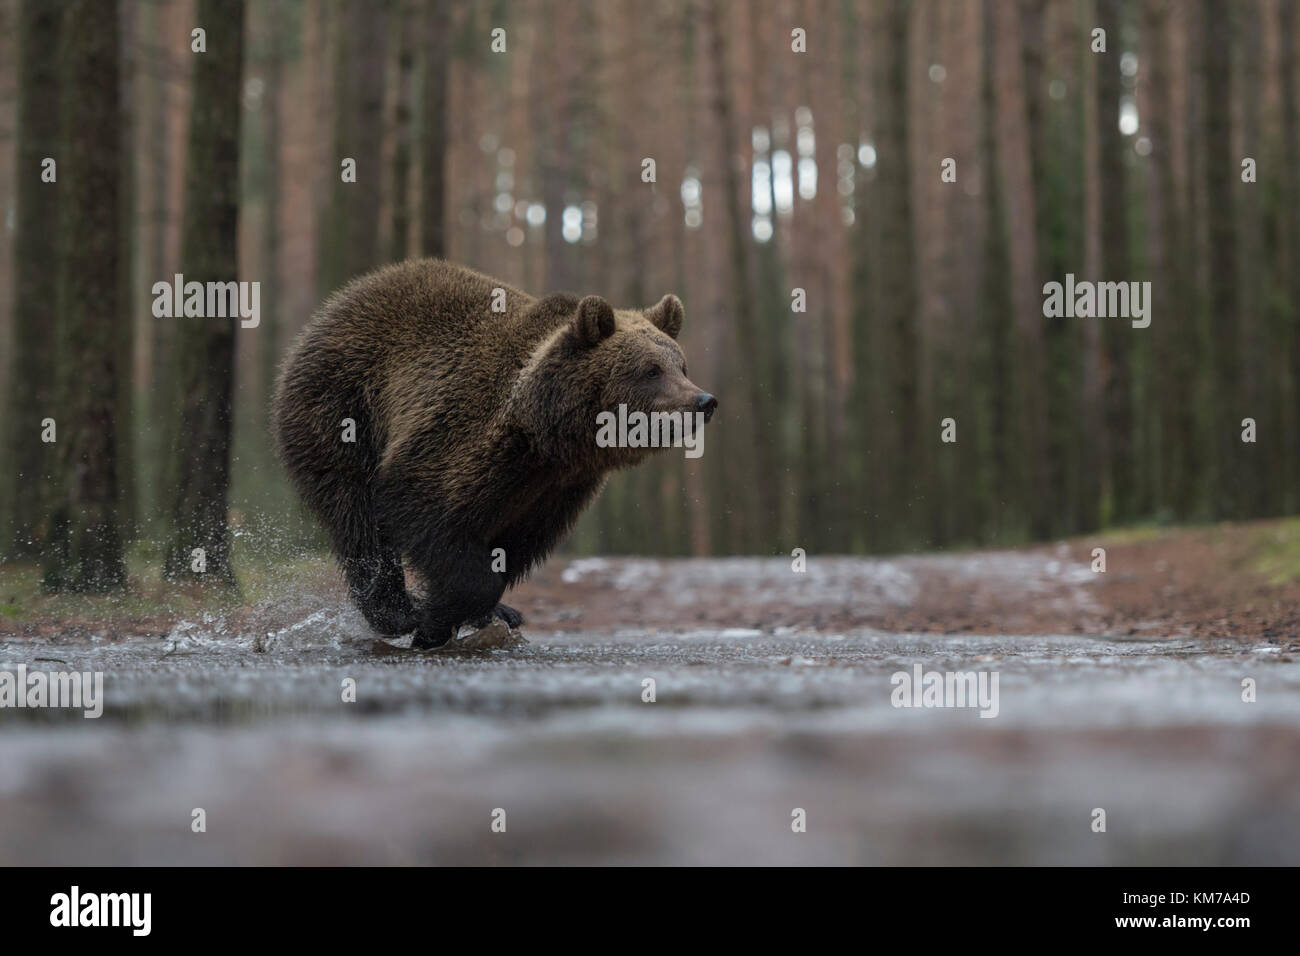 Eurasian Brown Bear ( Ursus arctos ), young cub in a hurry, running fast through a frozen puddle, crossing a forest road, in winter, Europe. Stock Photo